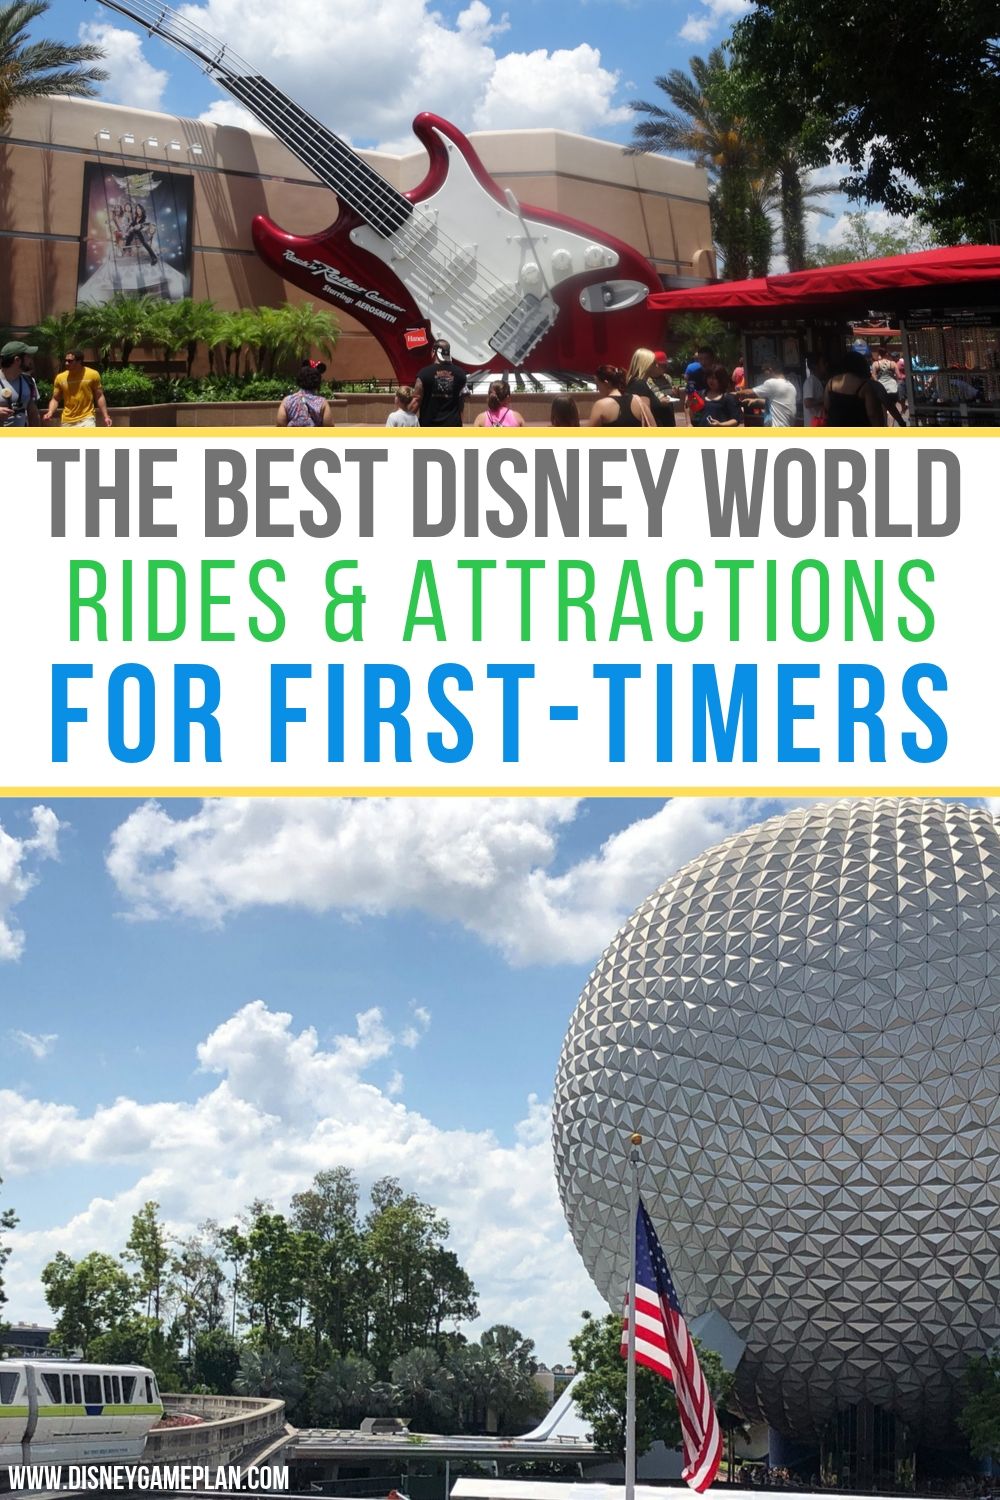 Disney World has so many rides and attractions. Today I am going to be sharing some of the most popular and can't miss rides and attractions throughout the Disney parks. #disneyworld #disneytips #disneyrides